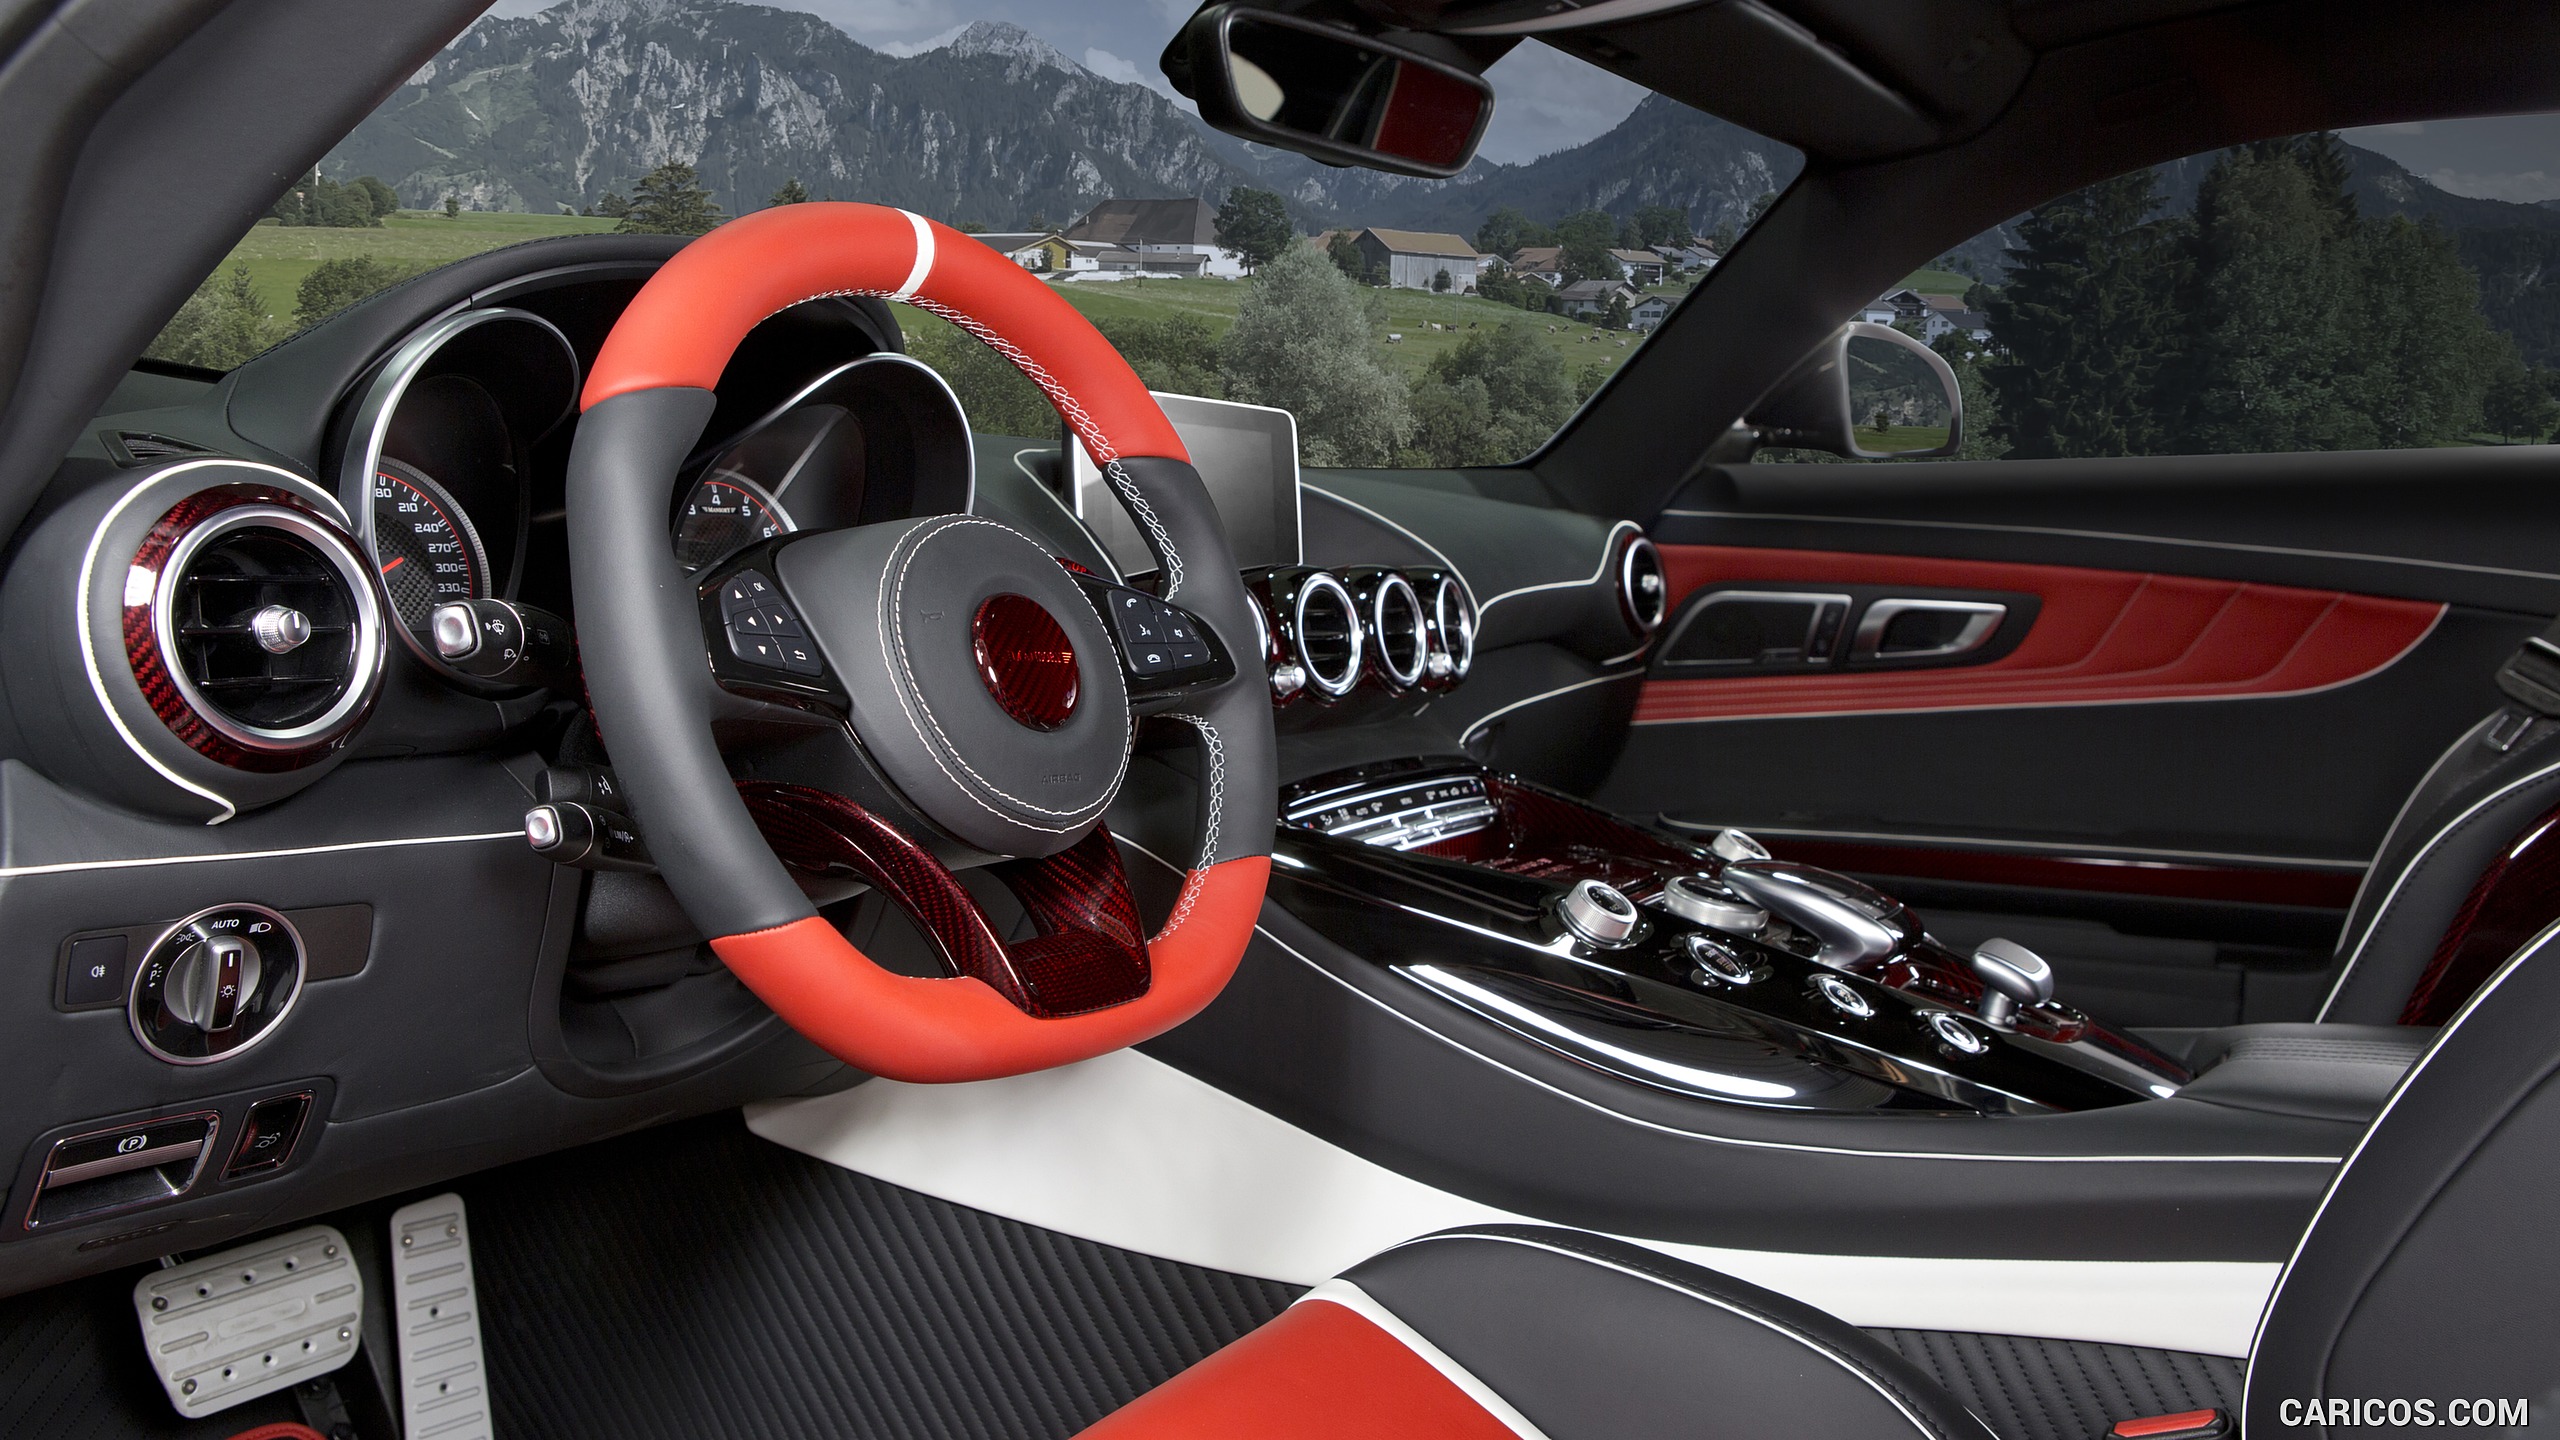 2016 MANSORY Mercedes-AMG GT S - Interior, #7 of 10